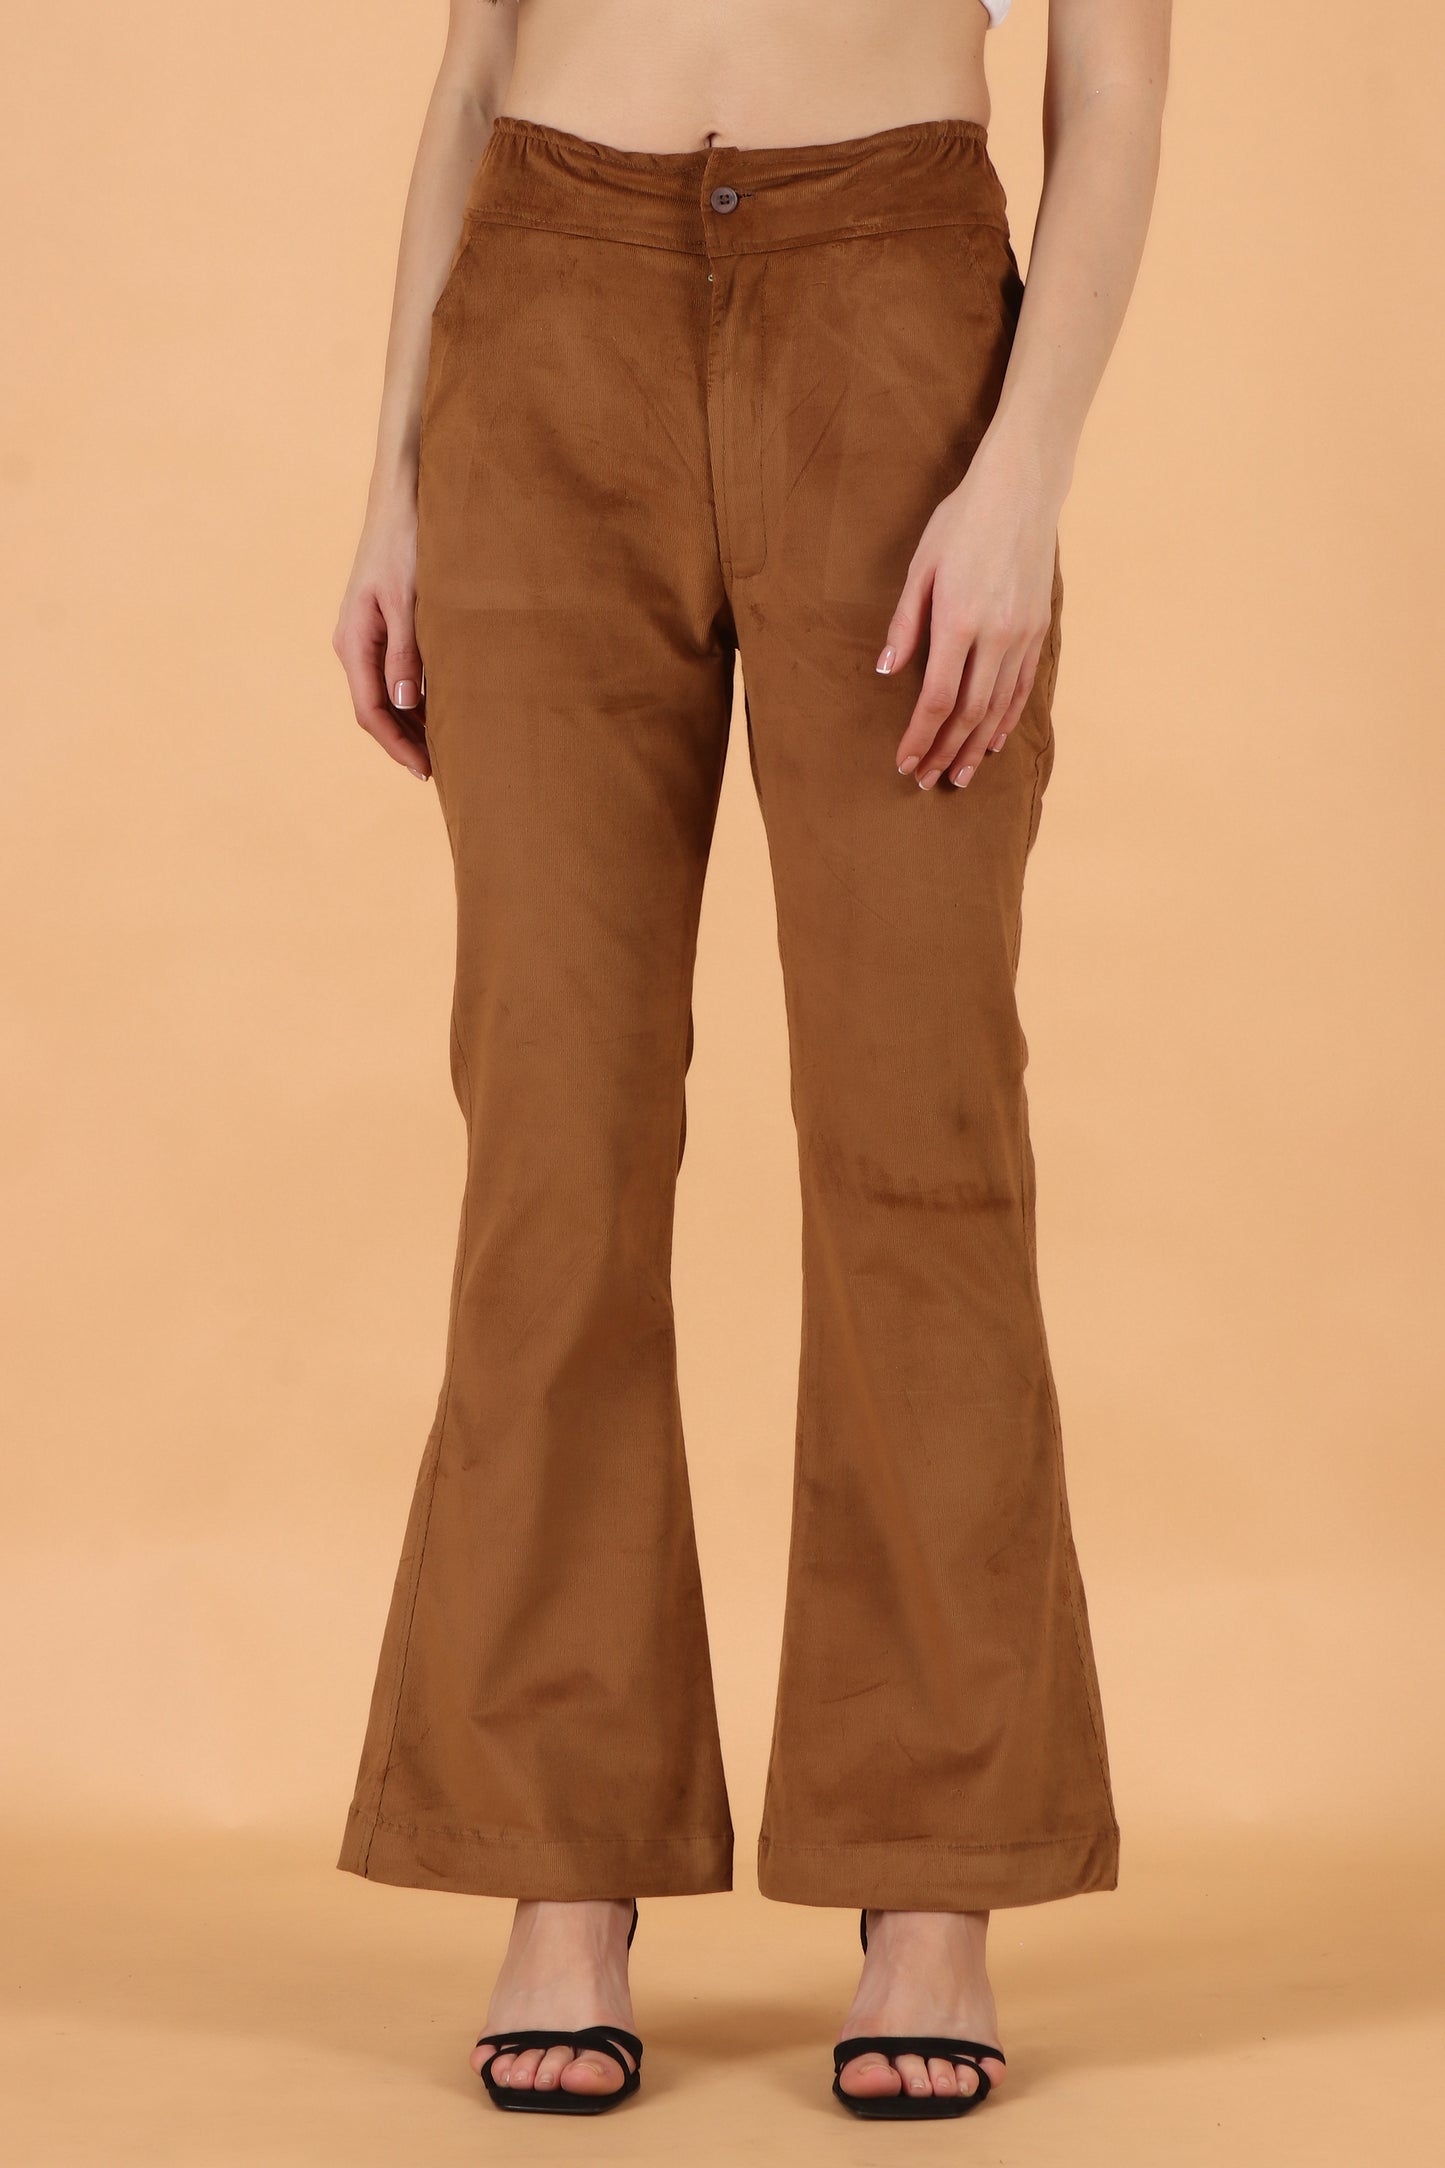 All Size, Bell Bottoms, Brown Bell Bottoms, Corduory, Corduory Bell Bottoms, Double Pockets, Double Side Pockets, Dual Side Pockets, Full Elasticized Waistline, Plus Size, Two Side Pockets